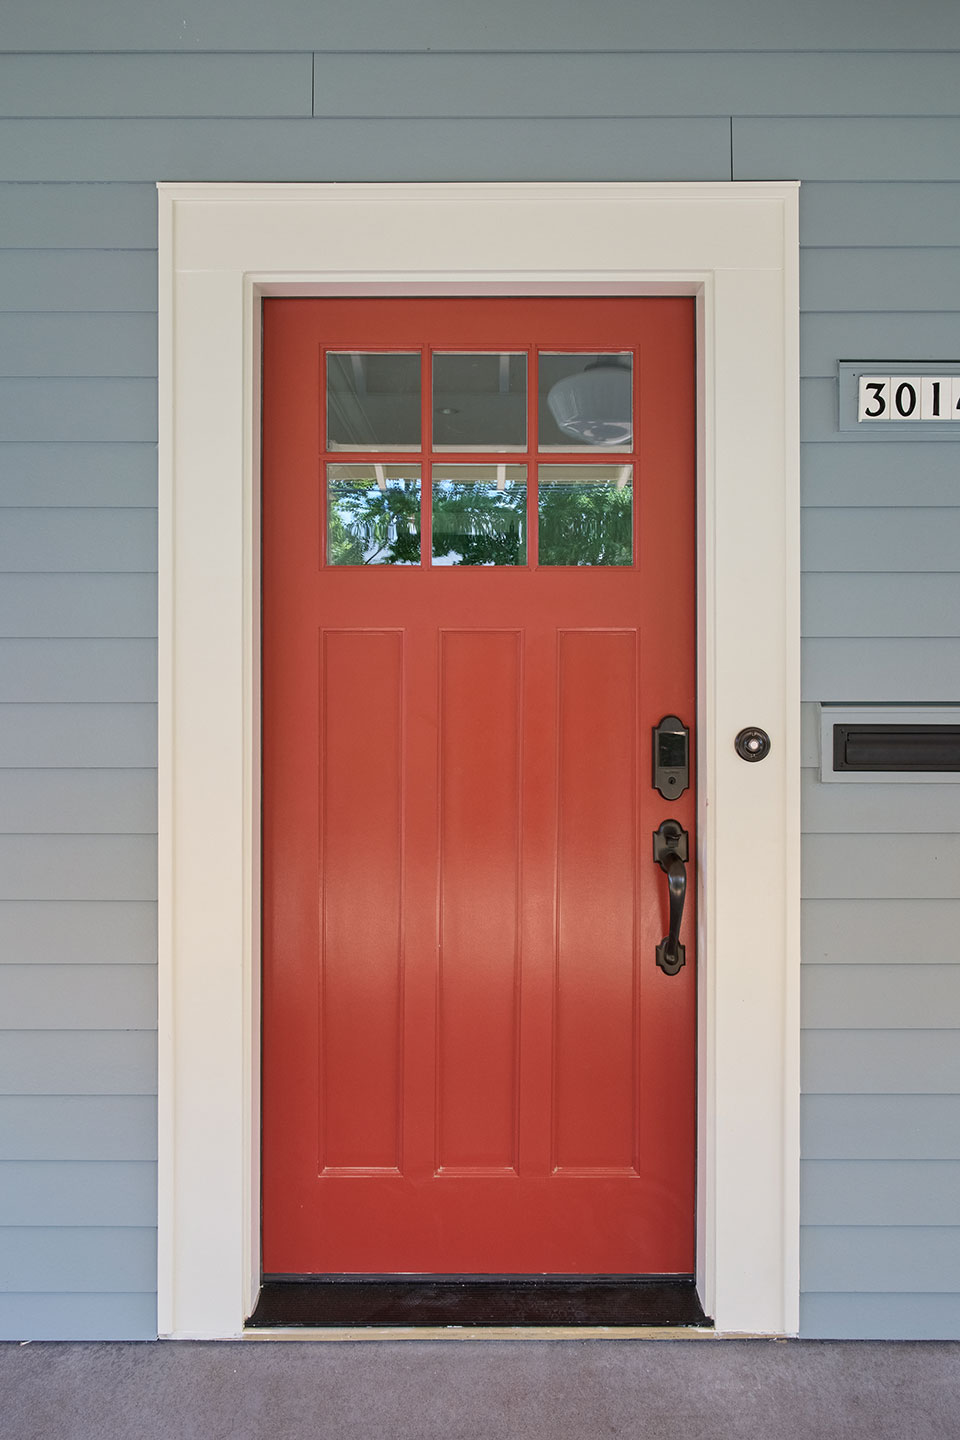 The front door of the Alameda Craftsman is painted a bright red.